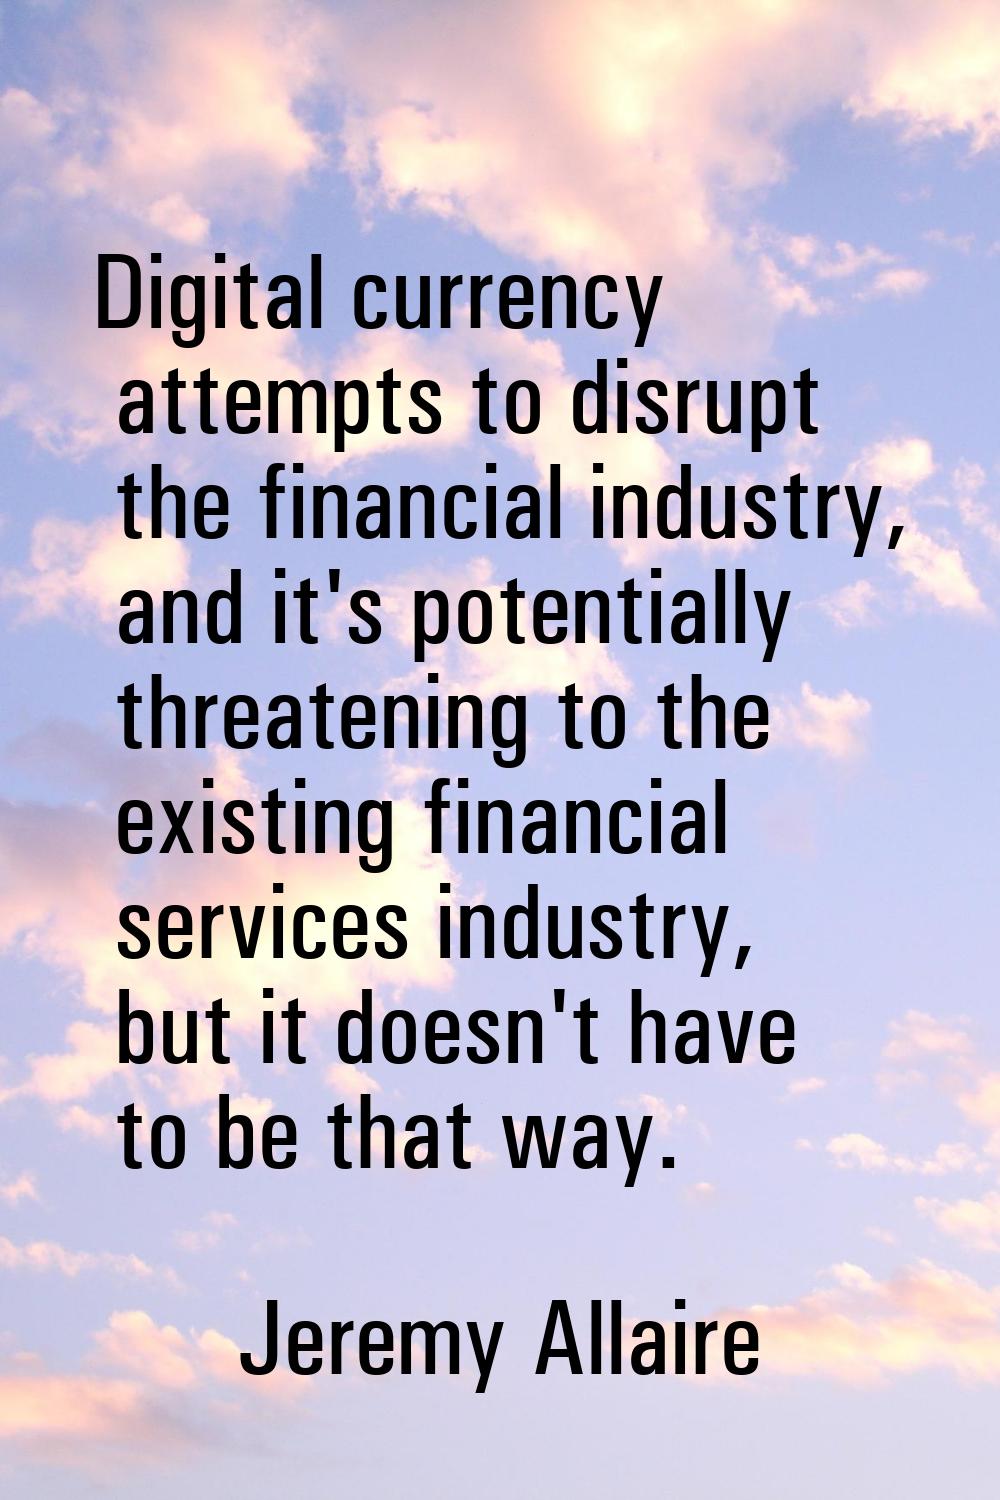 Digital currency attempts to disrupt the financial industry, and it's potentially threatening to th